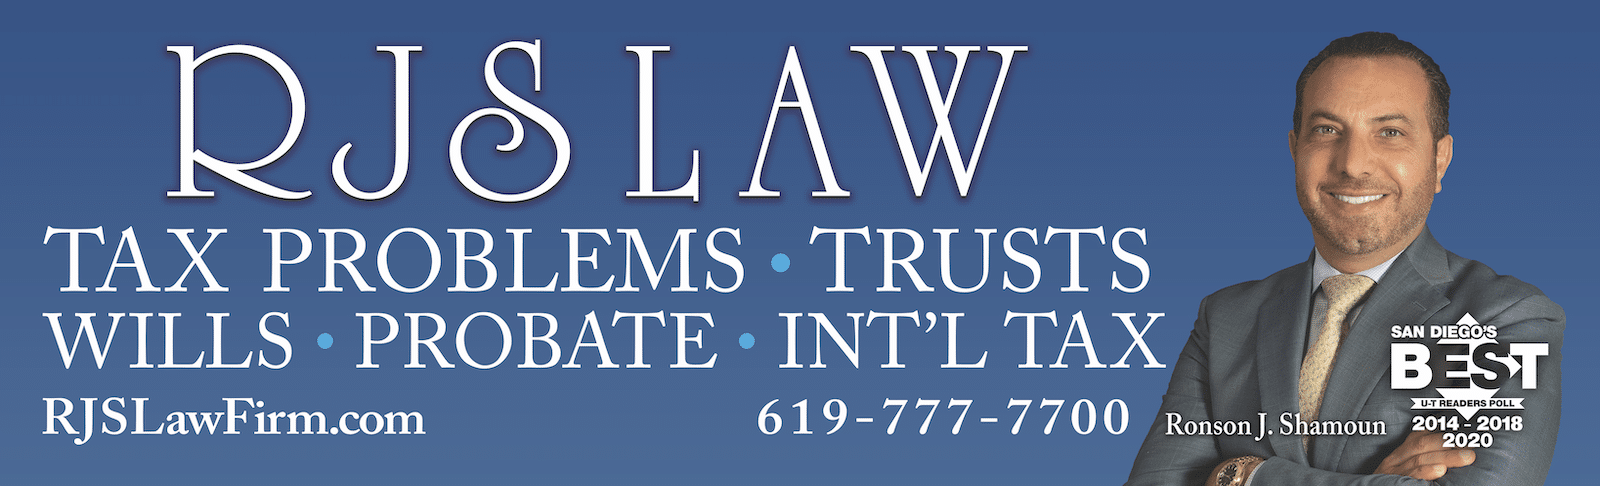 Voted San Diego's Best Tax Law Firm